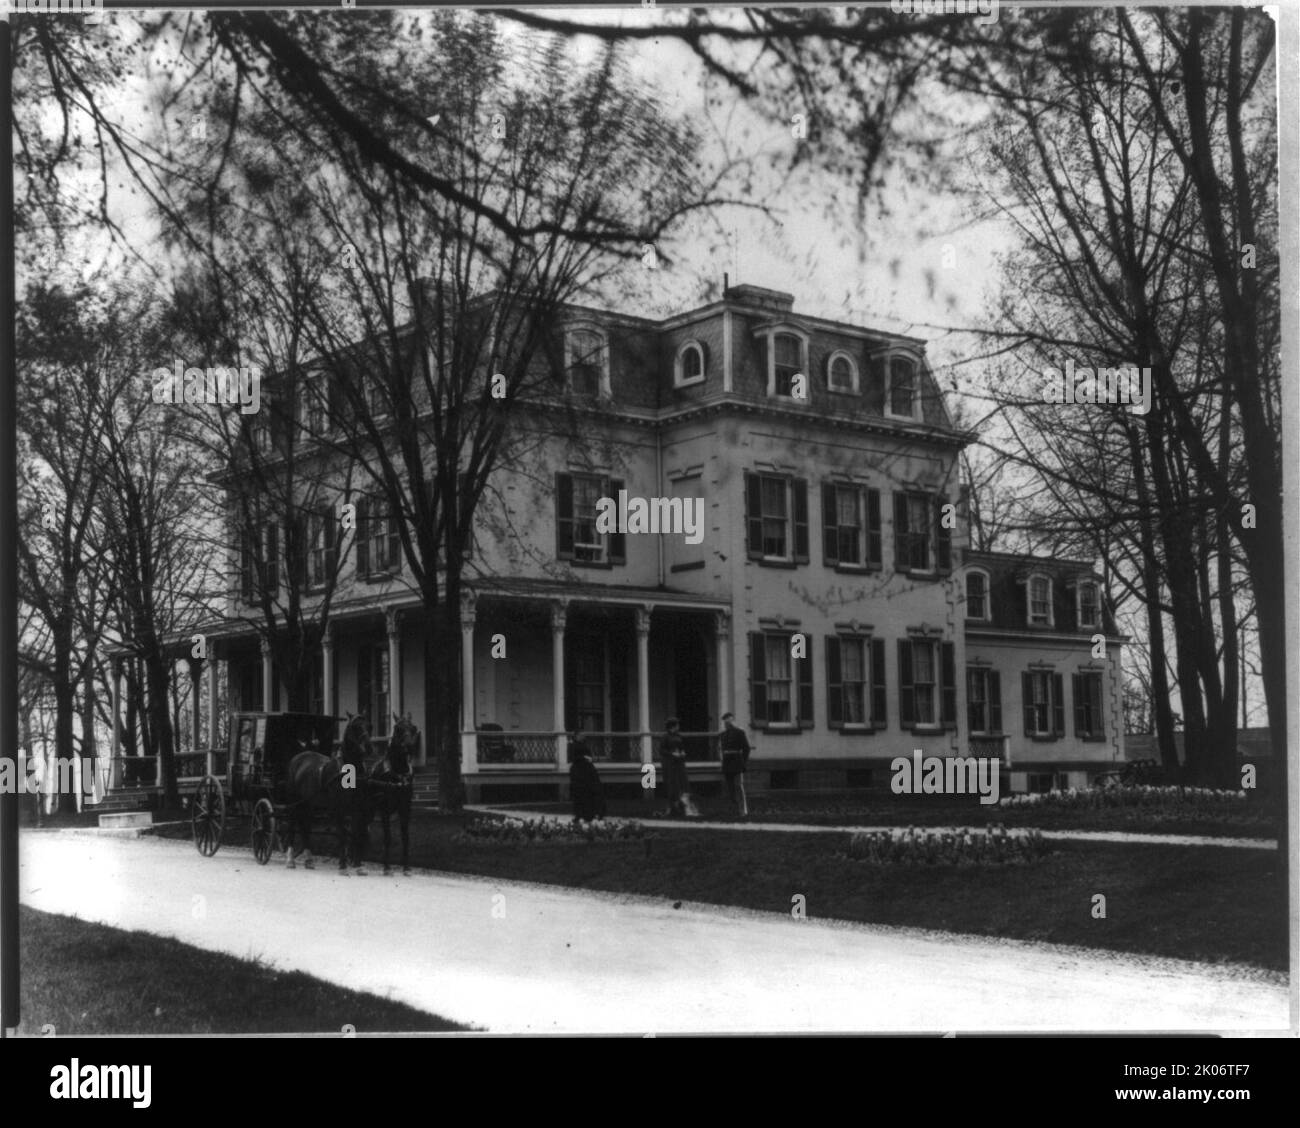 Soldiers' Home, exterior showing house, Washington, D.C, c1895. Shows U.S. Soldier's Home at Rock Creek Road and Upshur Street, N.W., with horse-drawn carriage, two women and soldier in uniform in front. Stock Photo